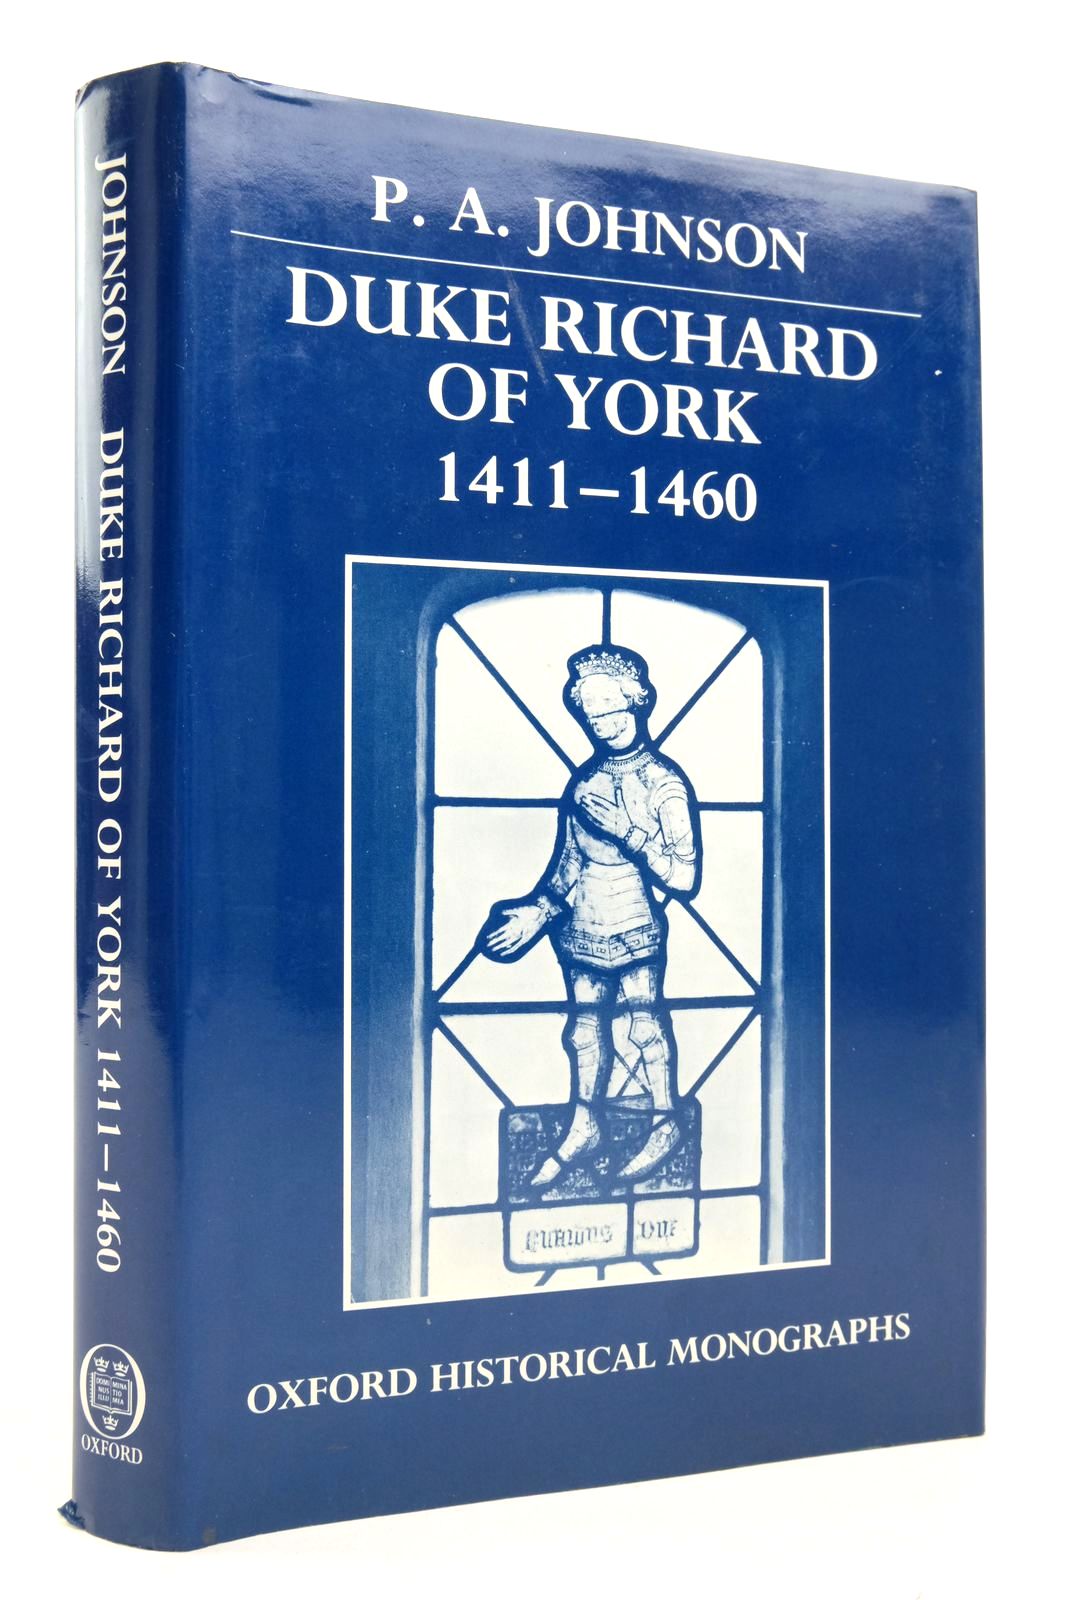 Photo of DUKE RICHARD OF YORK 1411-1460 written by Johnson, P.A. published by Clarendon Press (STOCK CODE: 2136701)  for sale by Stella & Rose's Books